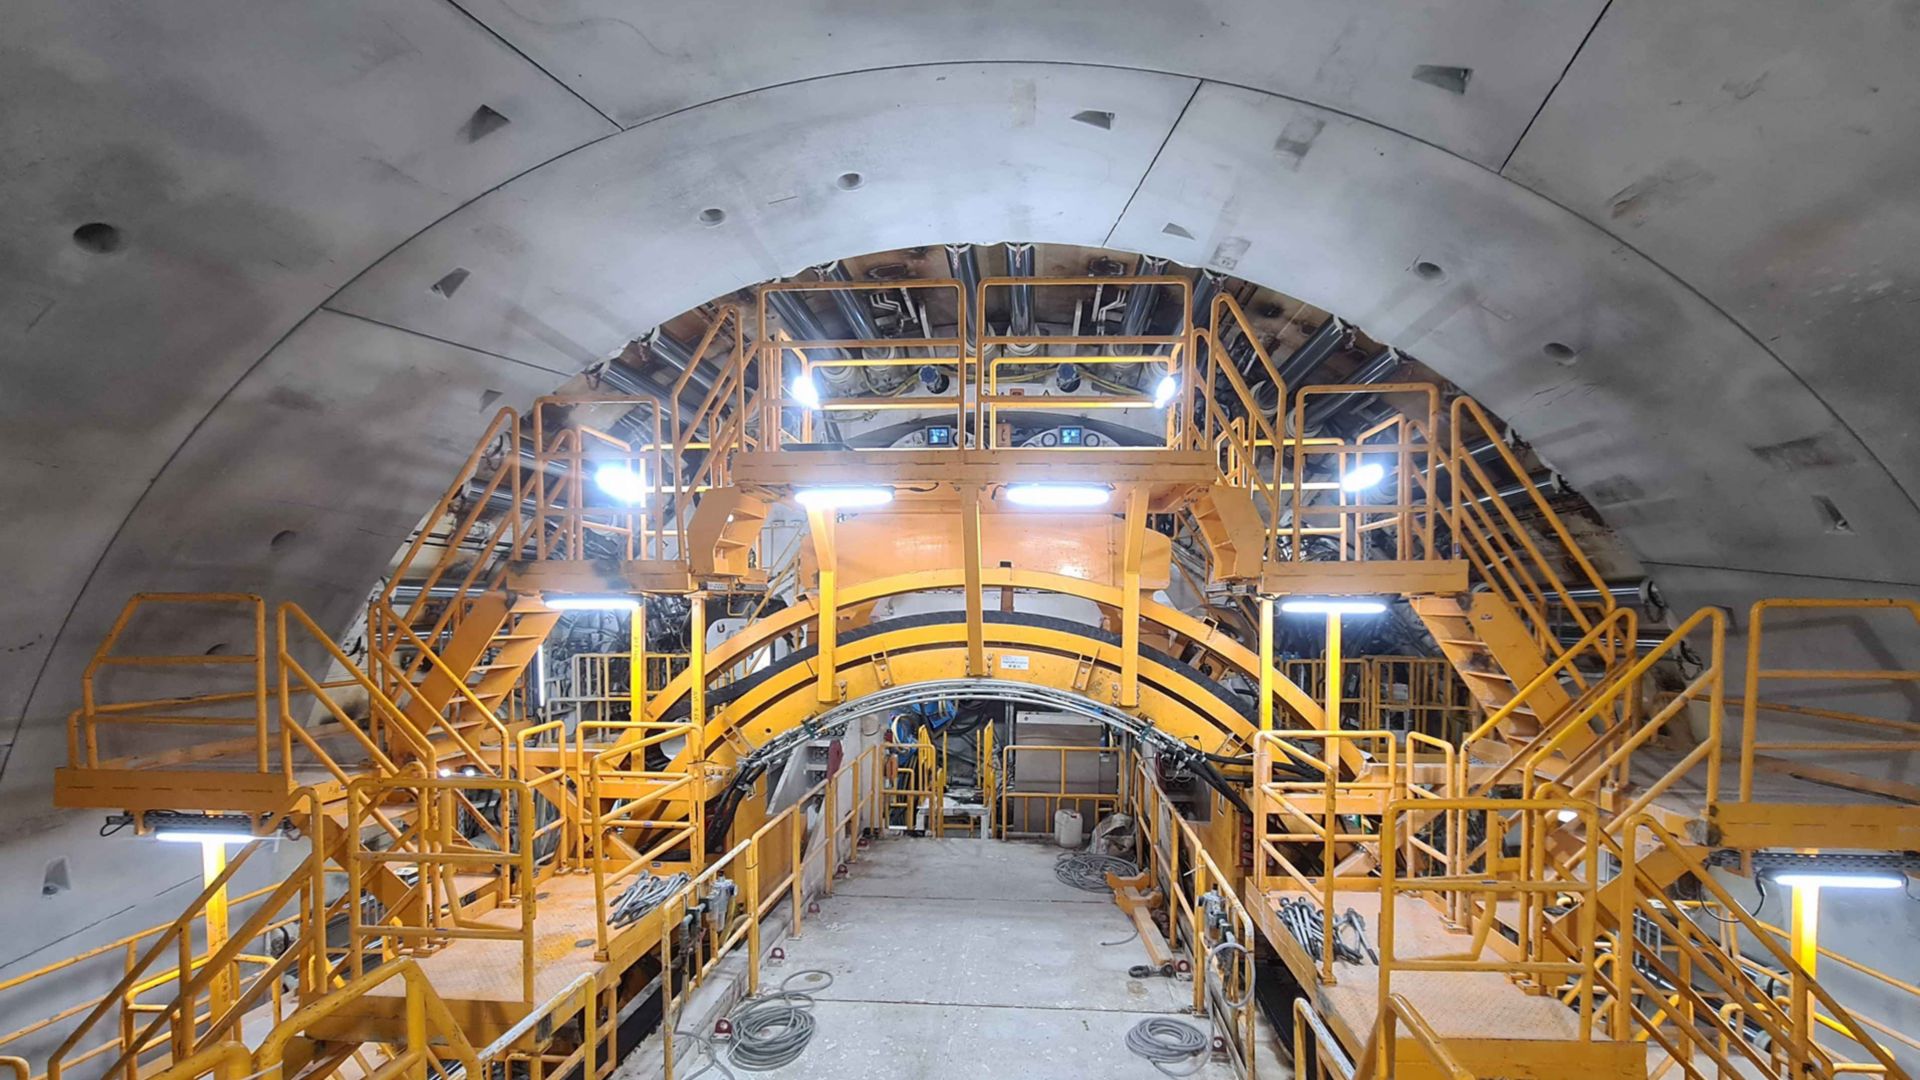 Tunnel boring machine on site at Swina River crossing in Poland tunnel TBM project